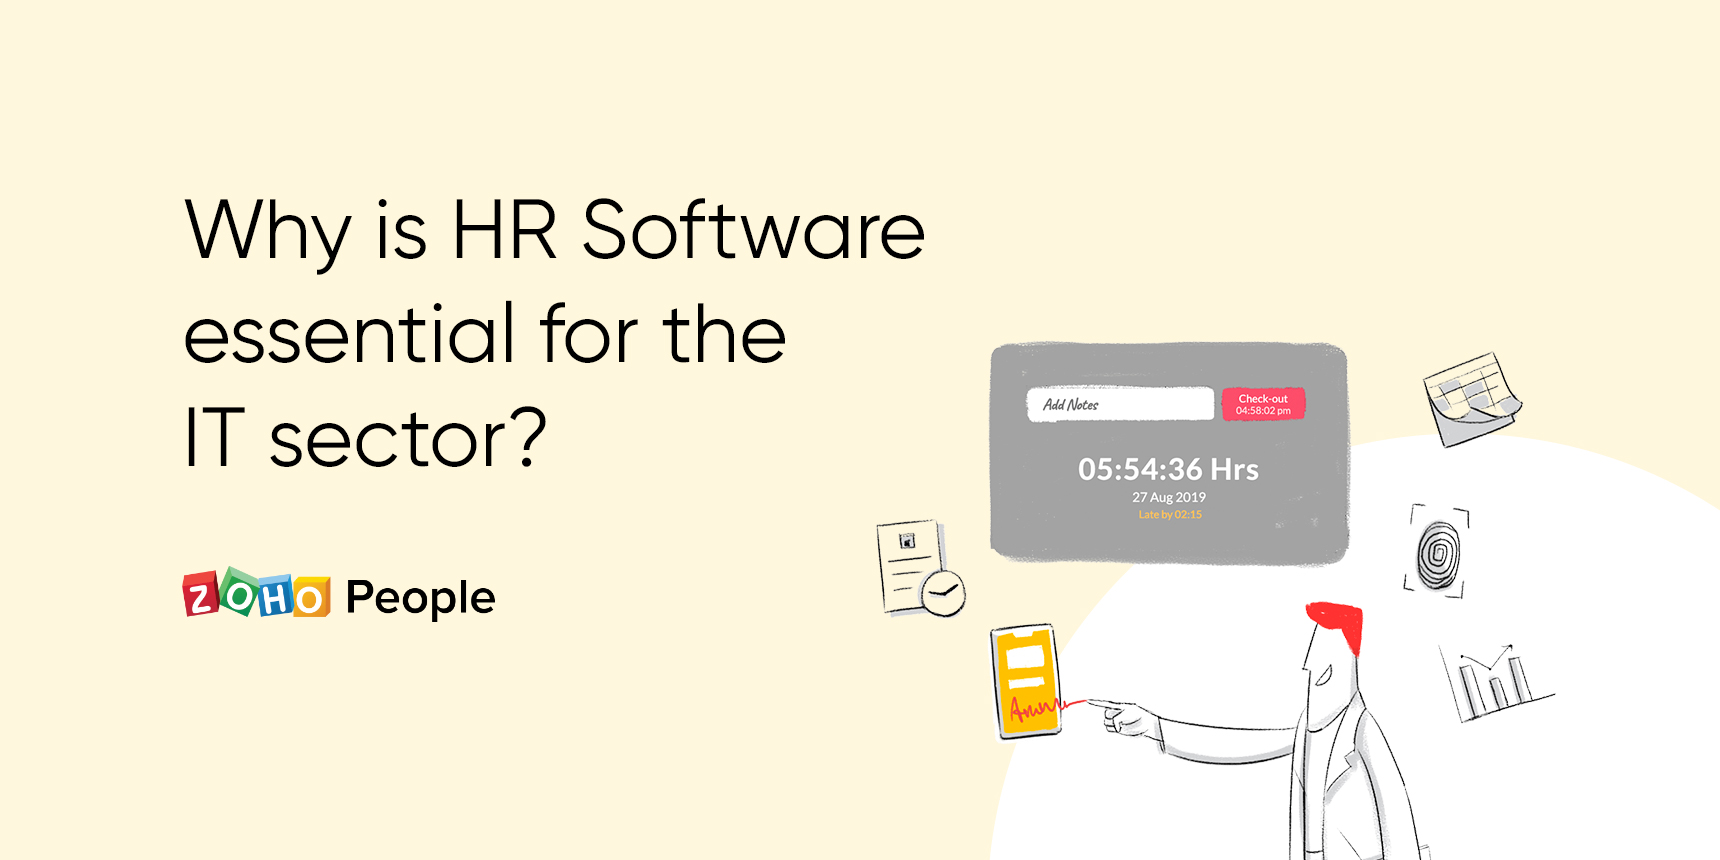 Benefits of HR software for the IT sector